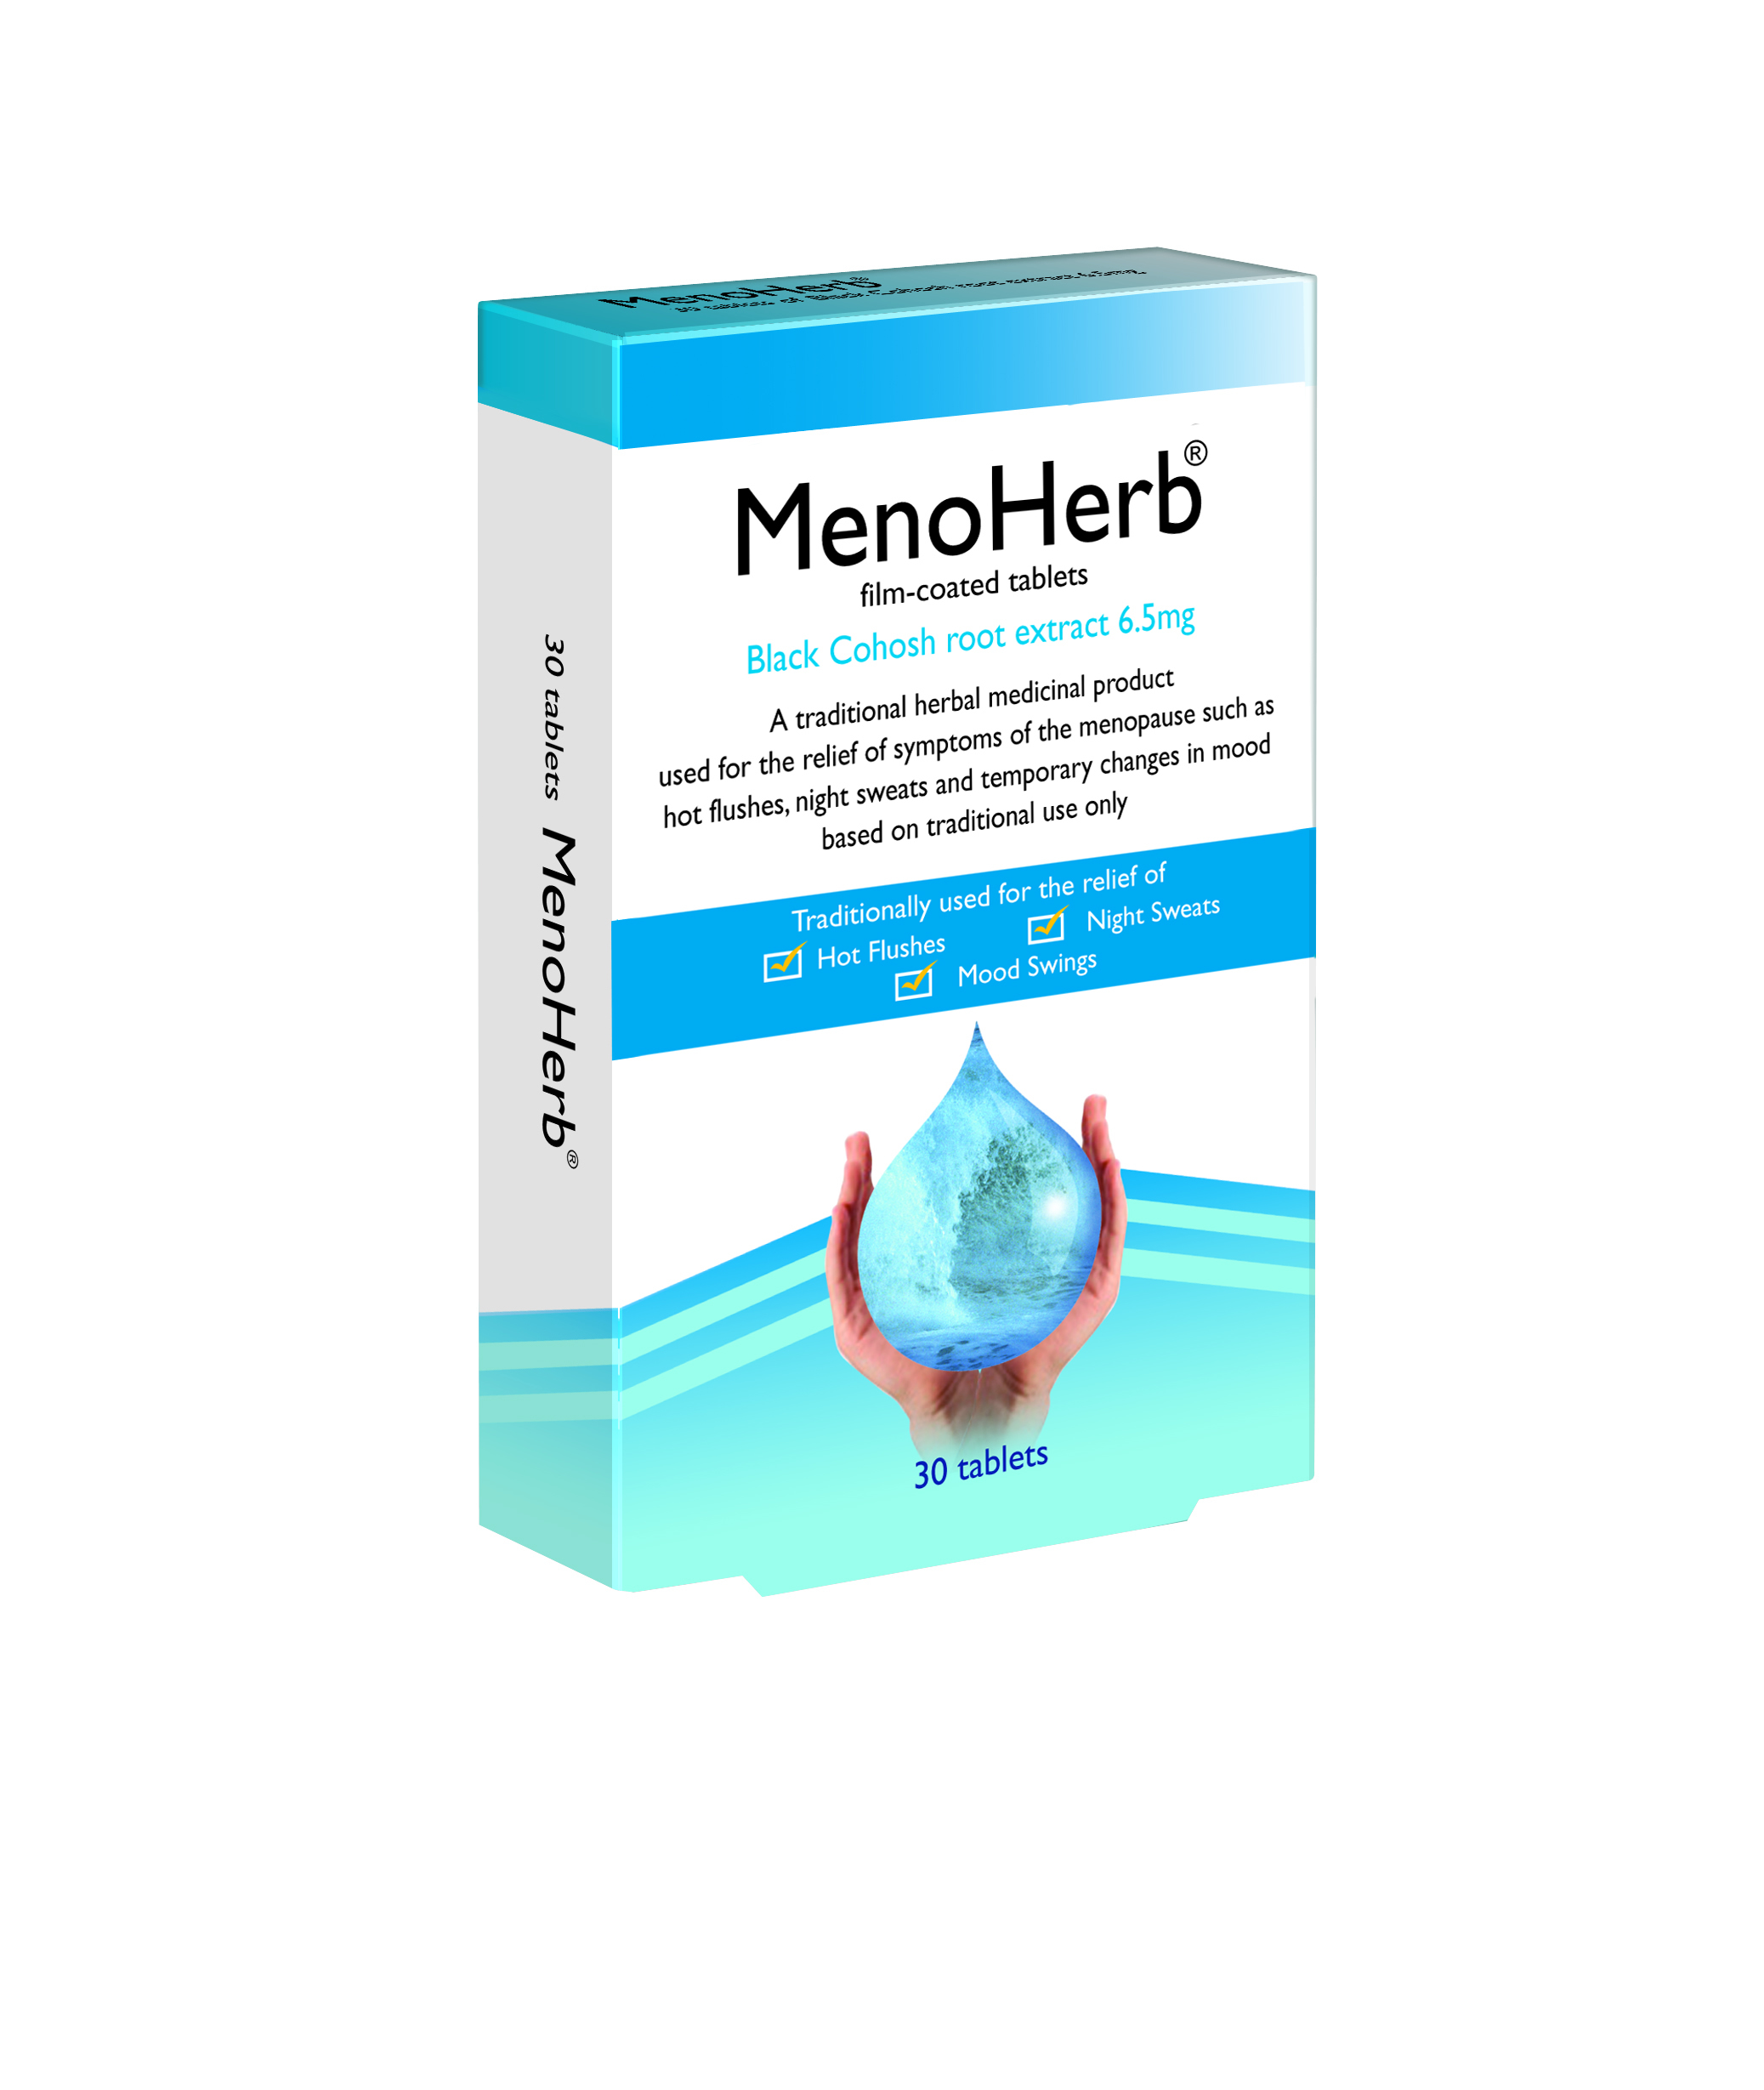 MenoHerb Film Coated Tablets 30: Express Chemist offer fast delivery and friendly, reliable service. Buy MenoHerb Film Coated Tablets 30 online from Express Chemist today!